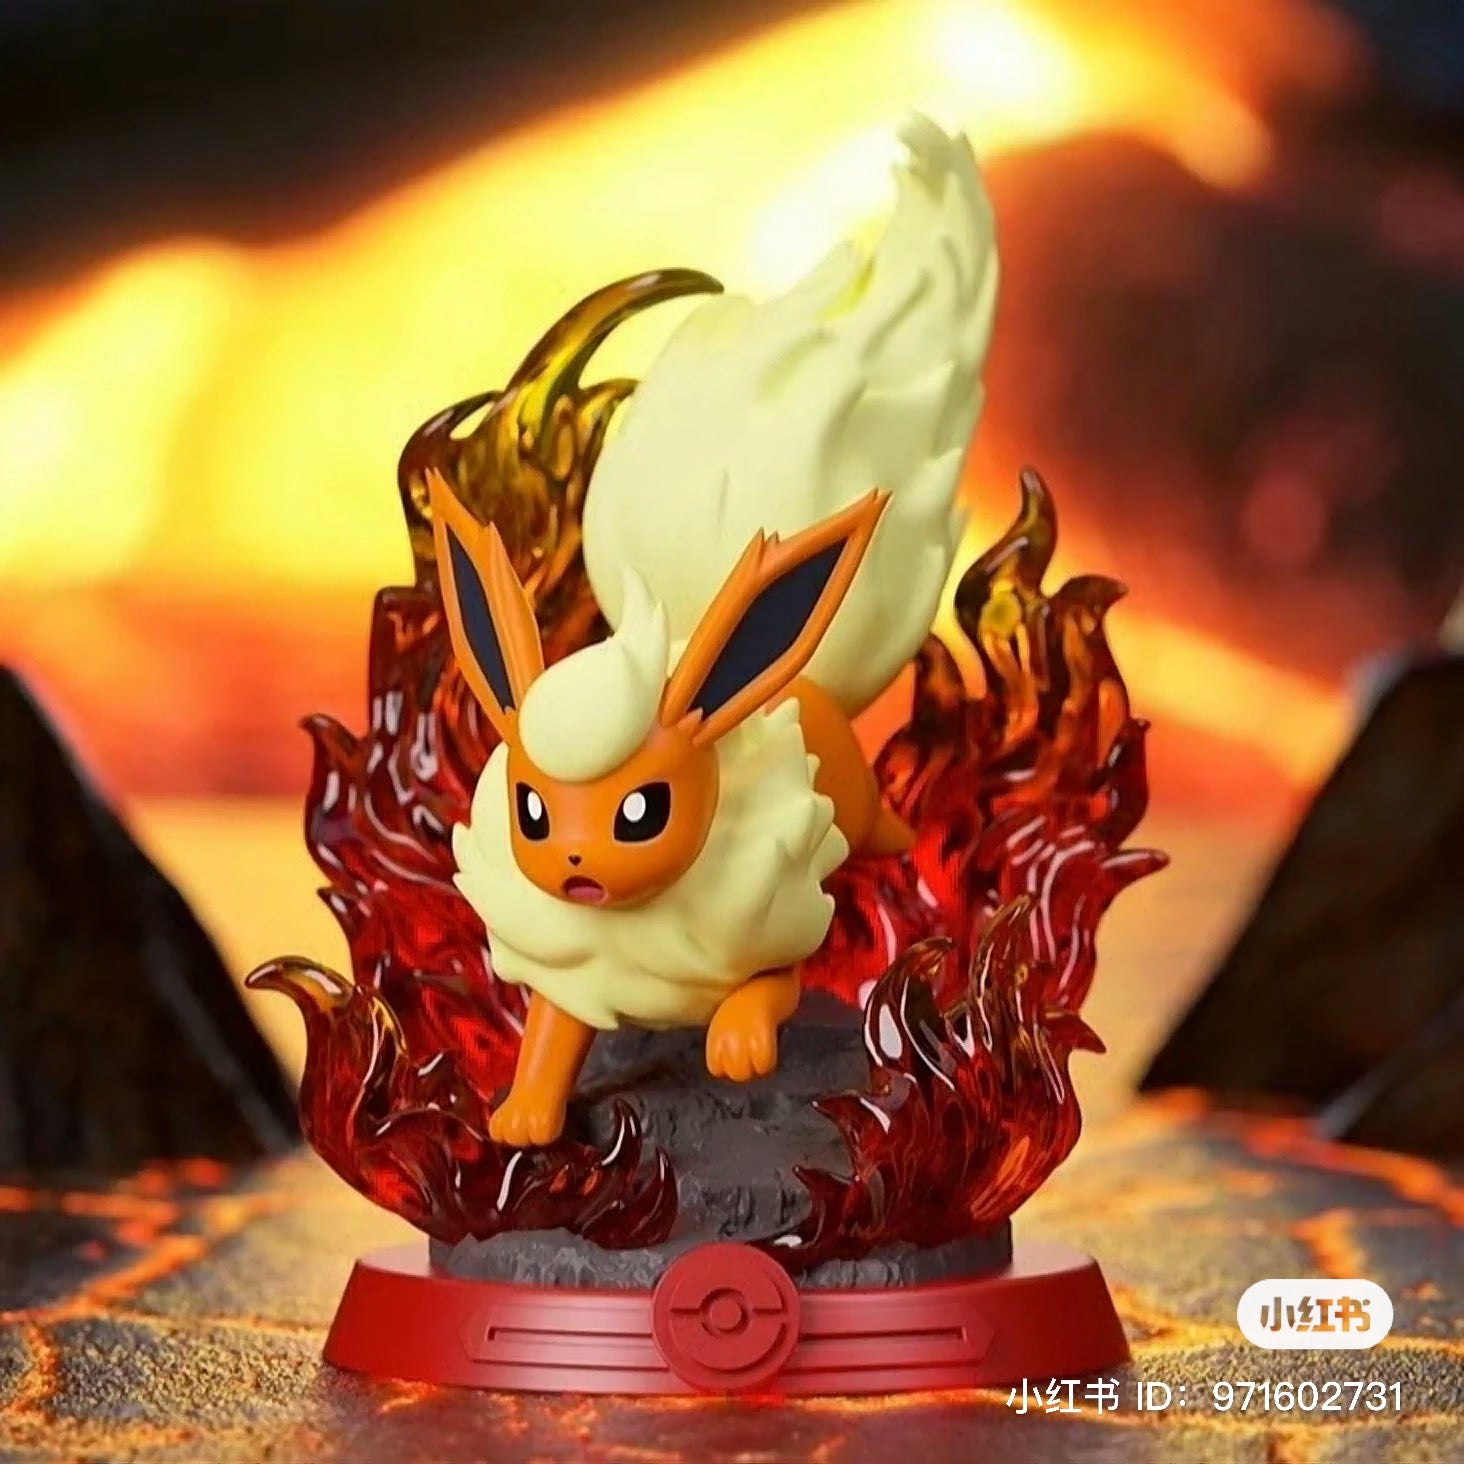 A cartoon Eevee figurine engulfed in flames, part of the Take a Risk, Eevee! Blind Box Series - Preorder.